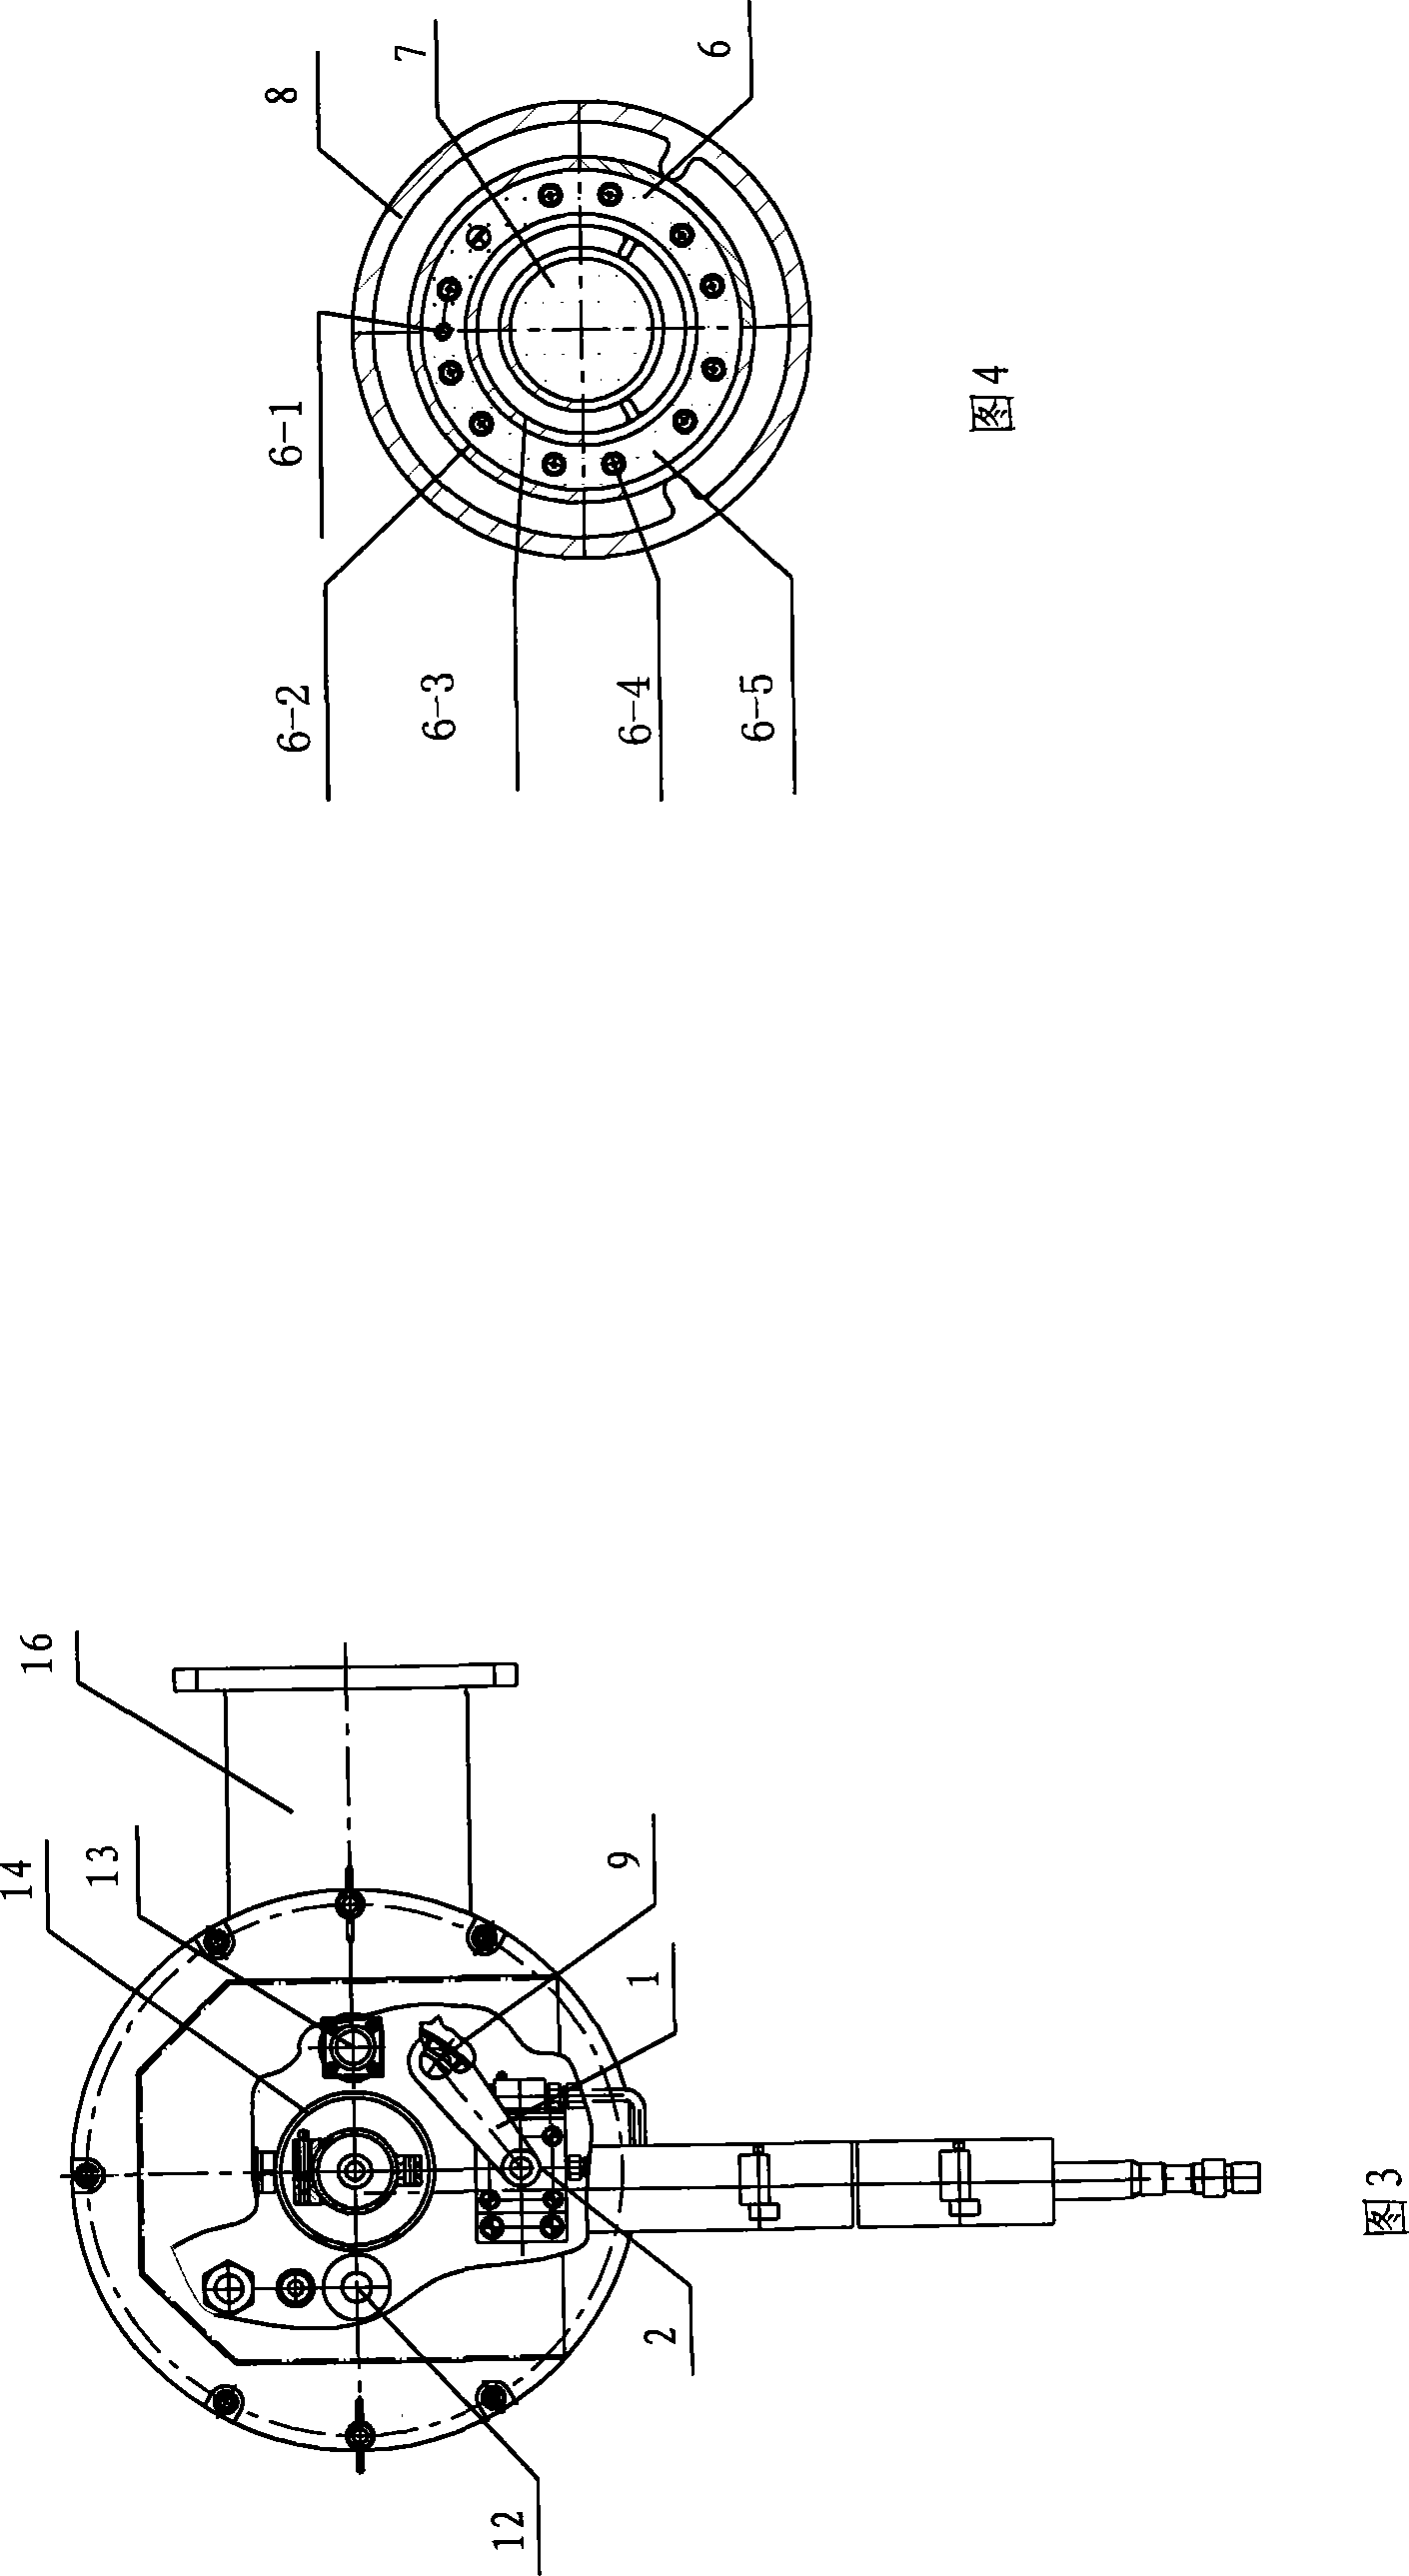 Two-stage flame generator